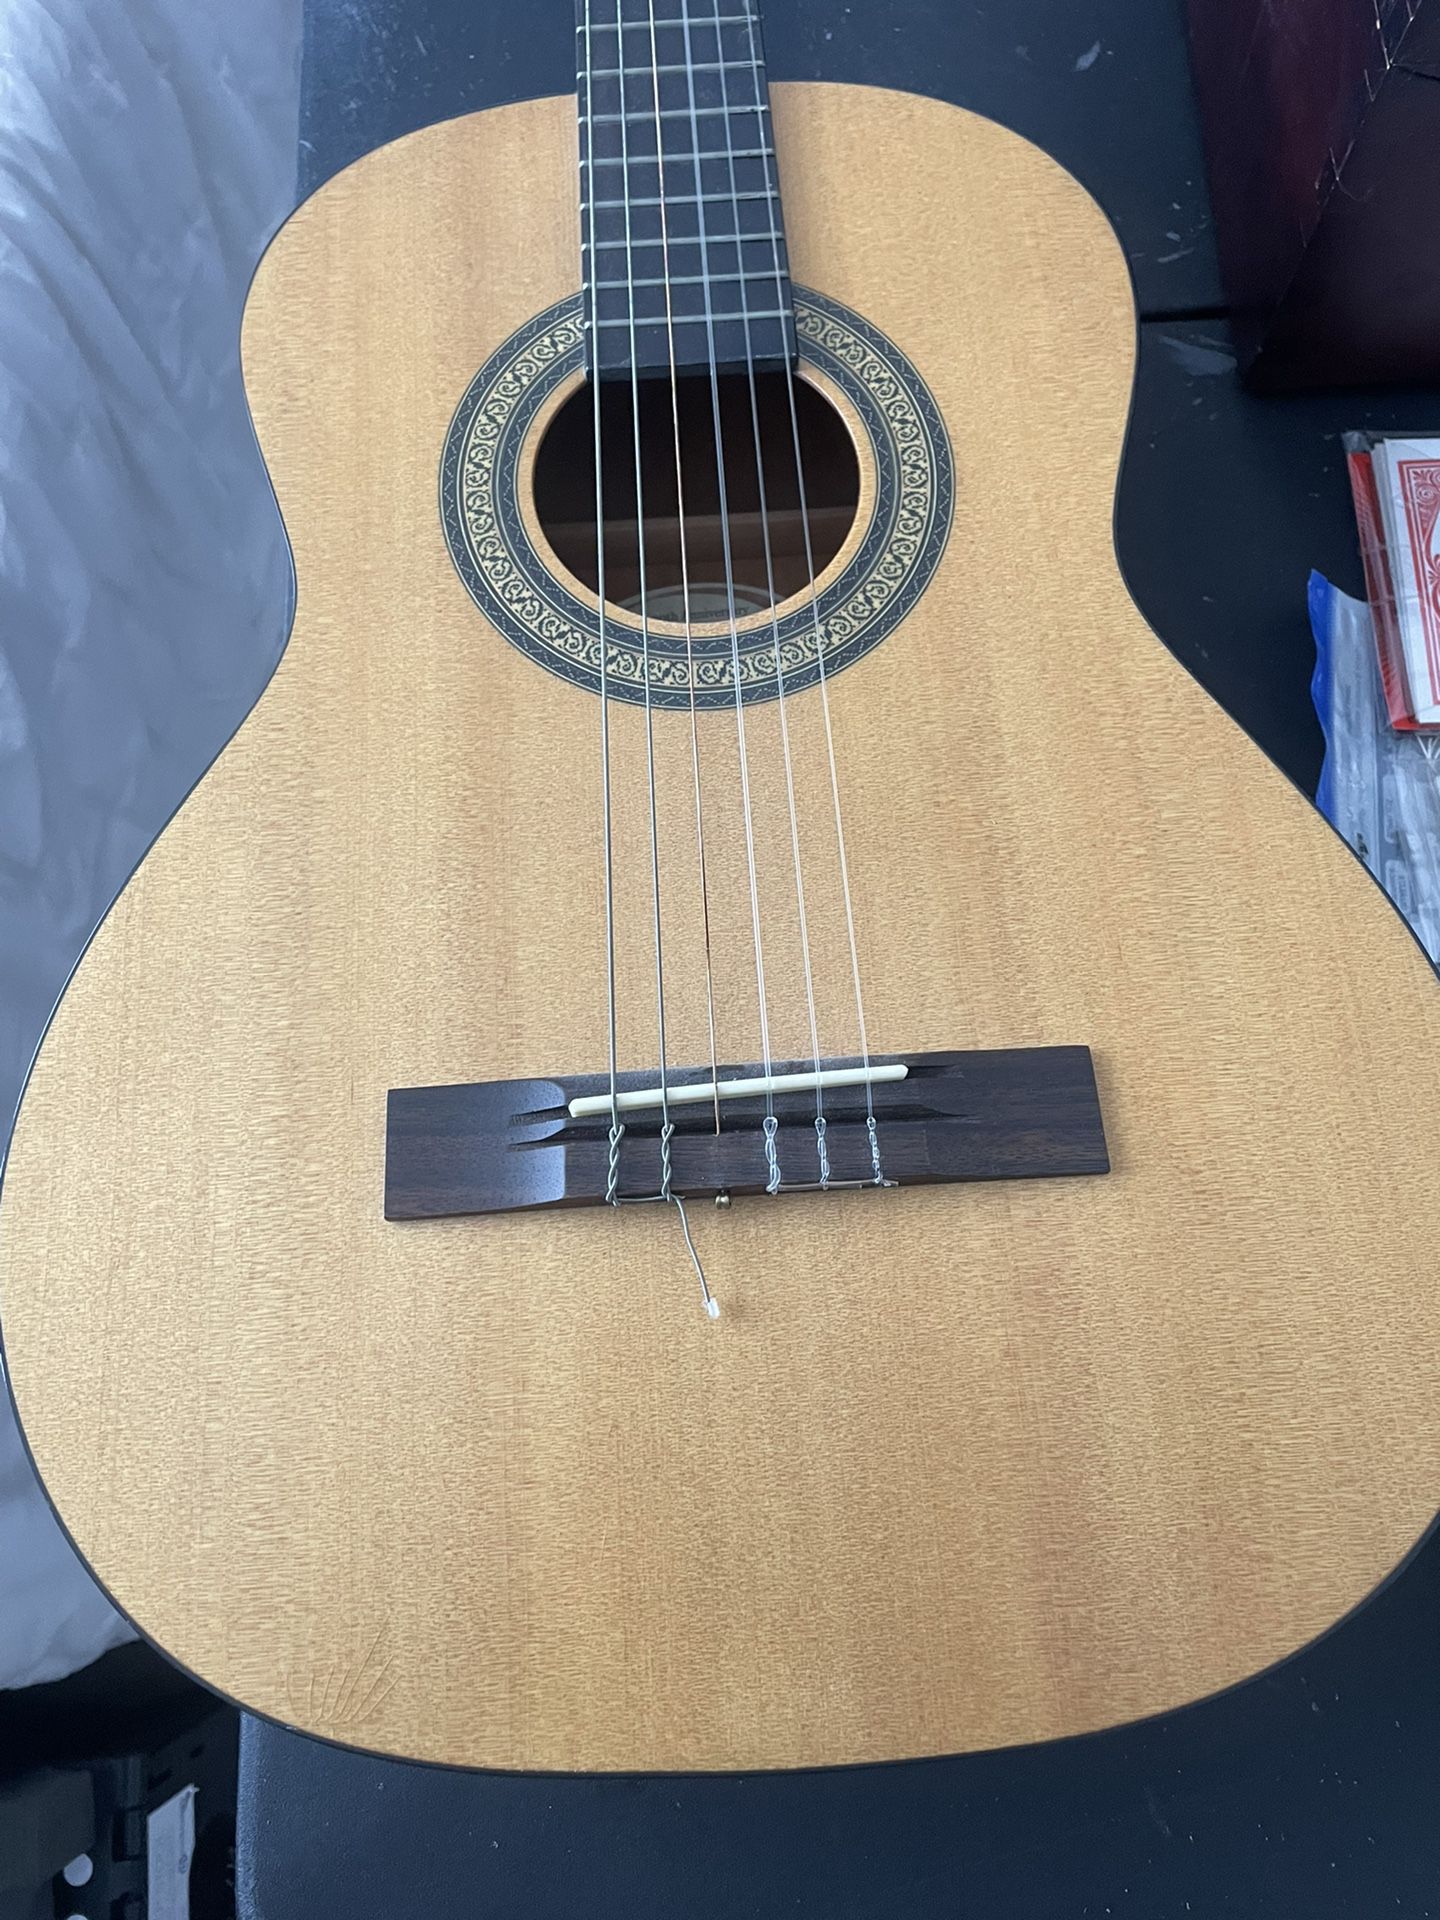  Fender Classical acoustic guitar 3/4 Size With Case Beautiful Looking No Marks Great Sounding Can Add Gig Bag 20$ In The Last Pic